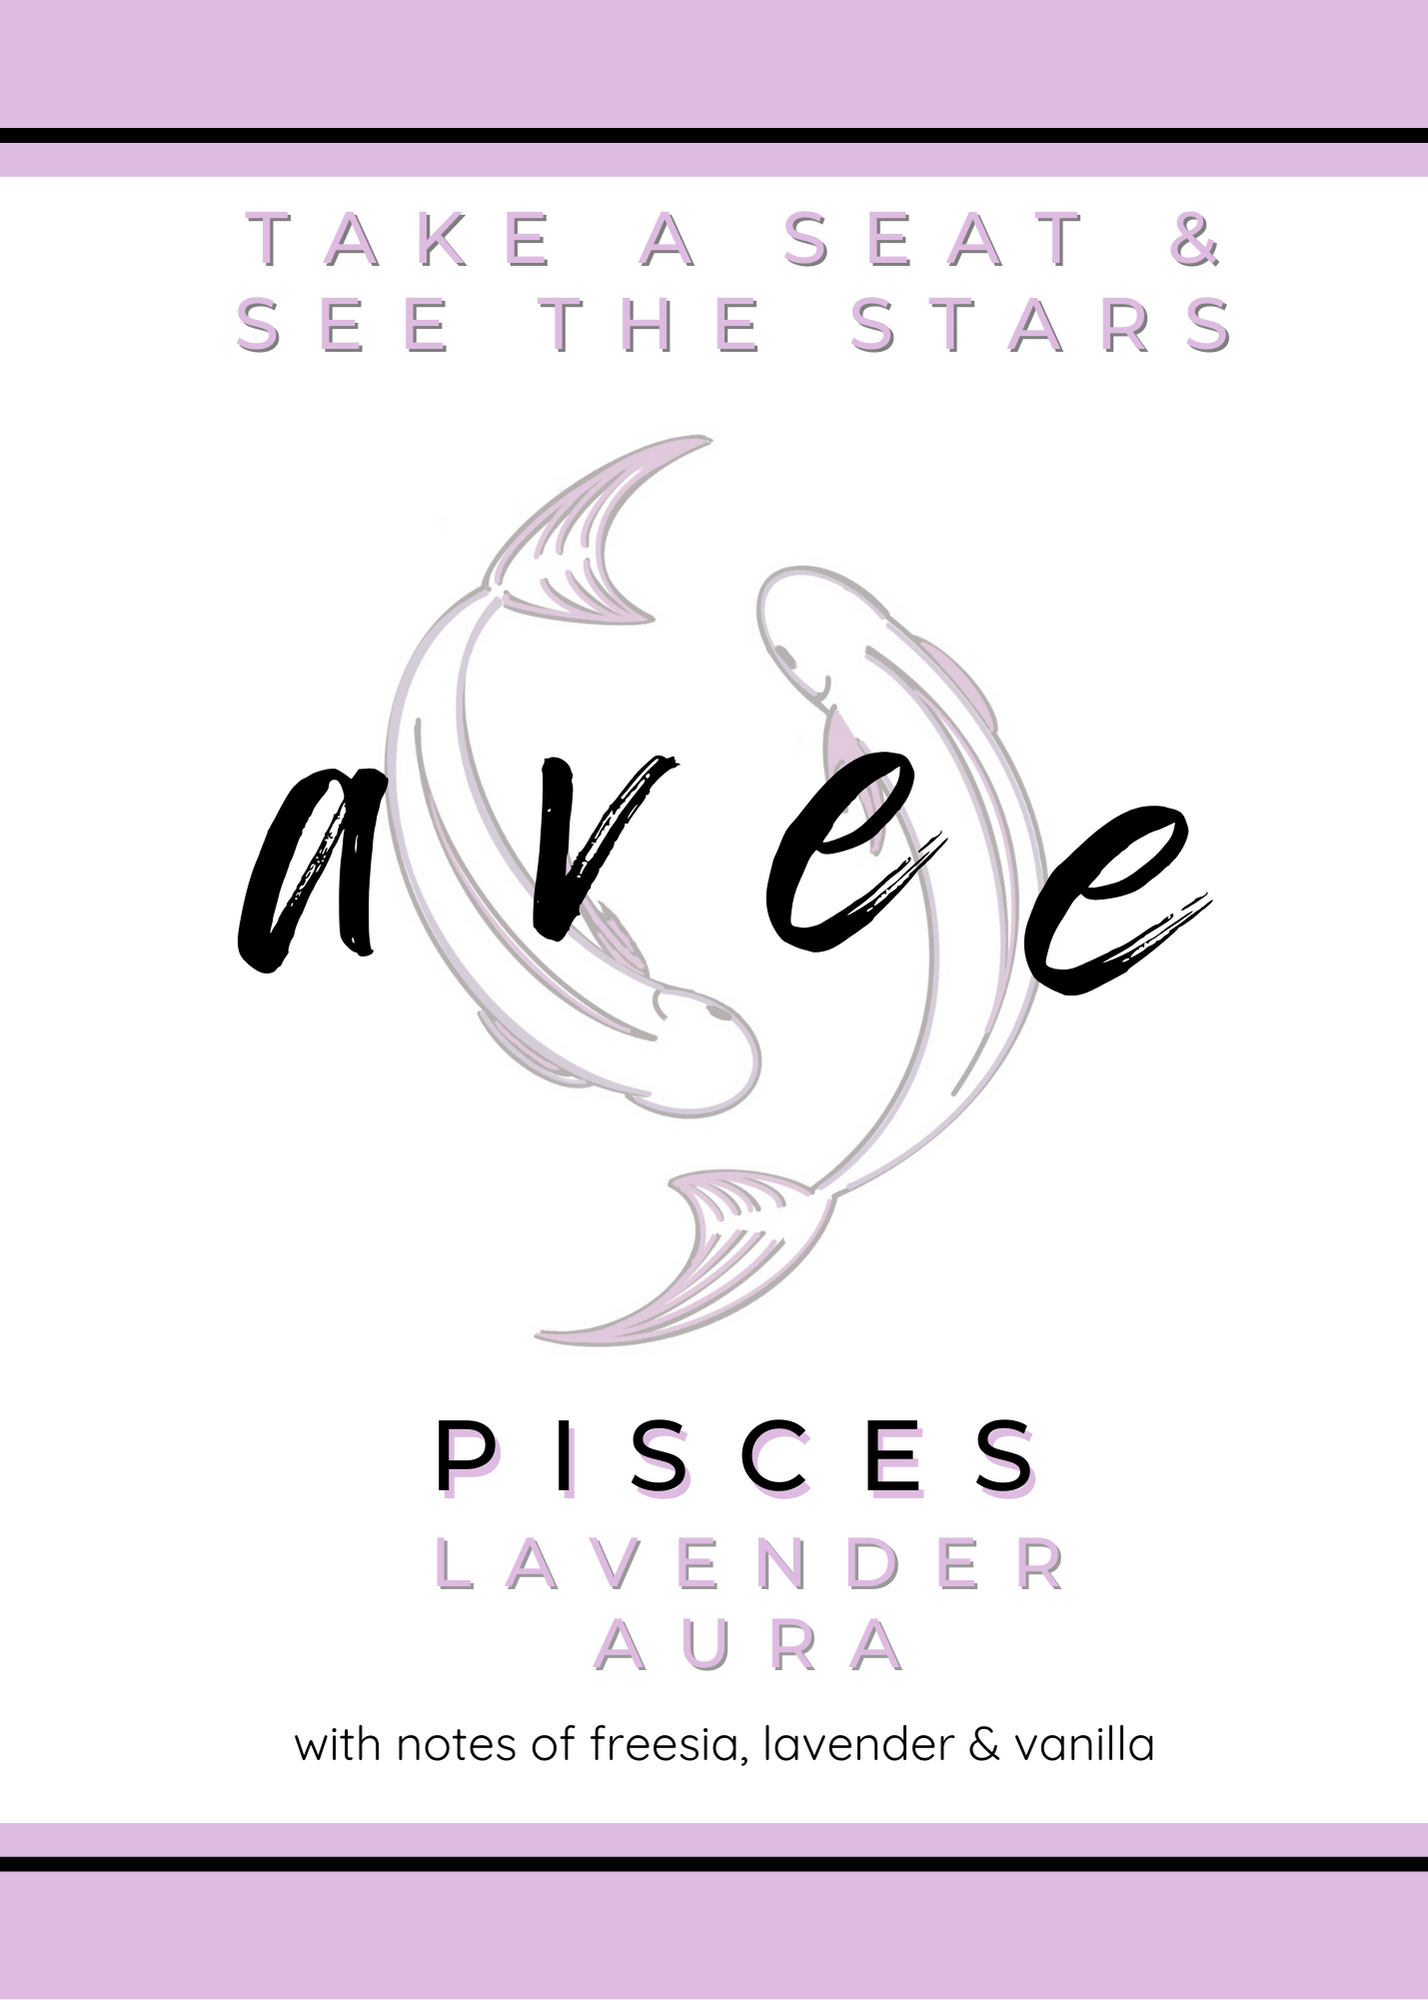 Pisces avee candle